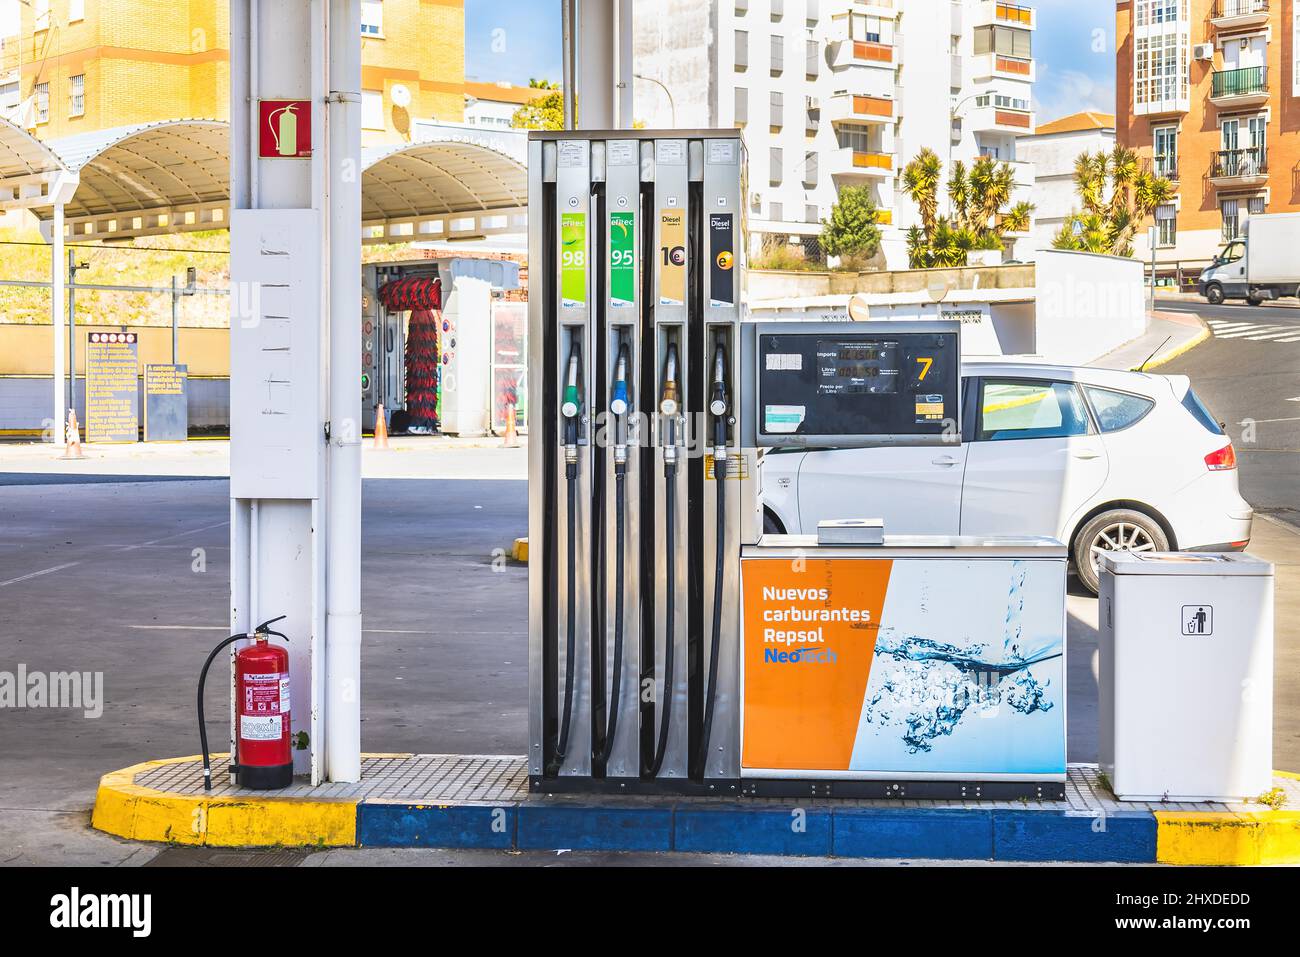 Huelva, Spain - March 10, 2022: View of a petrol pump at a gas Repsol station Stock Photo